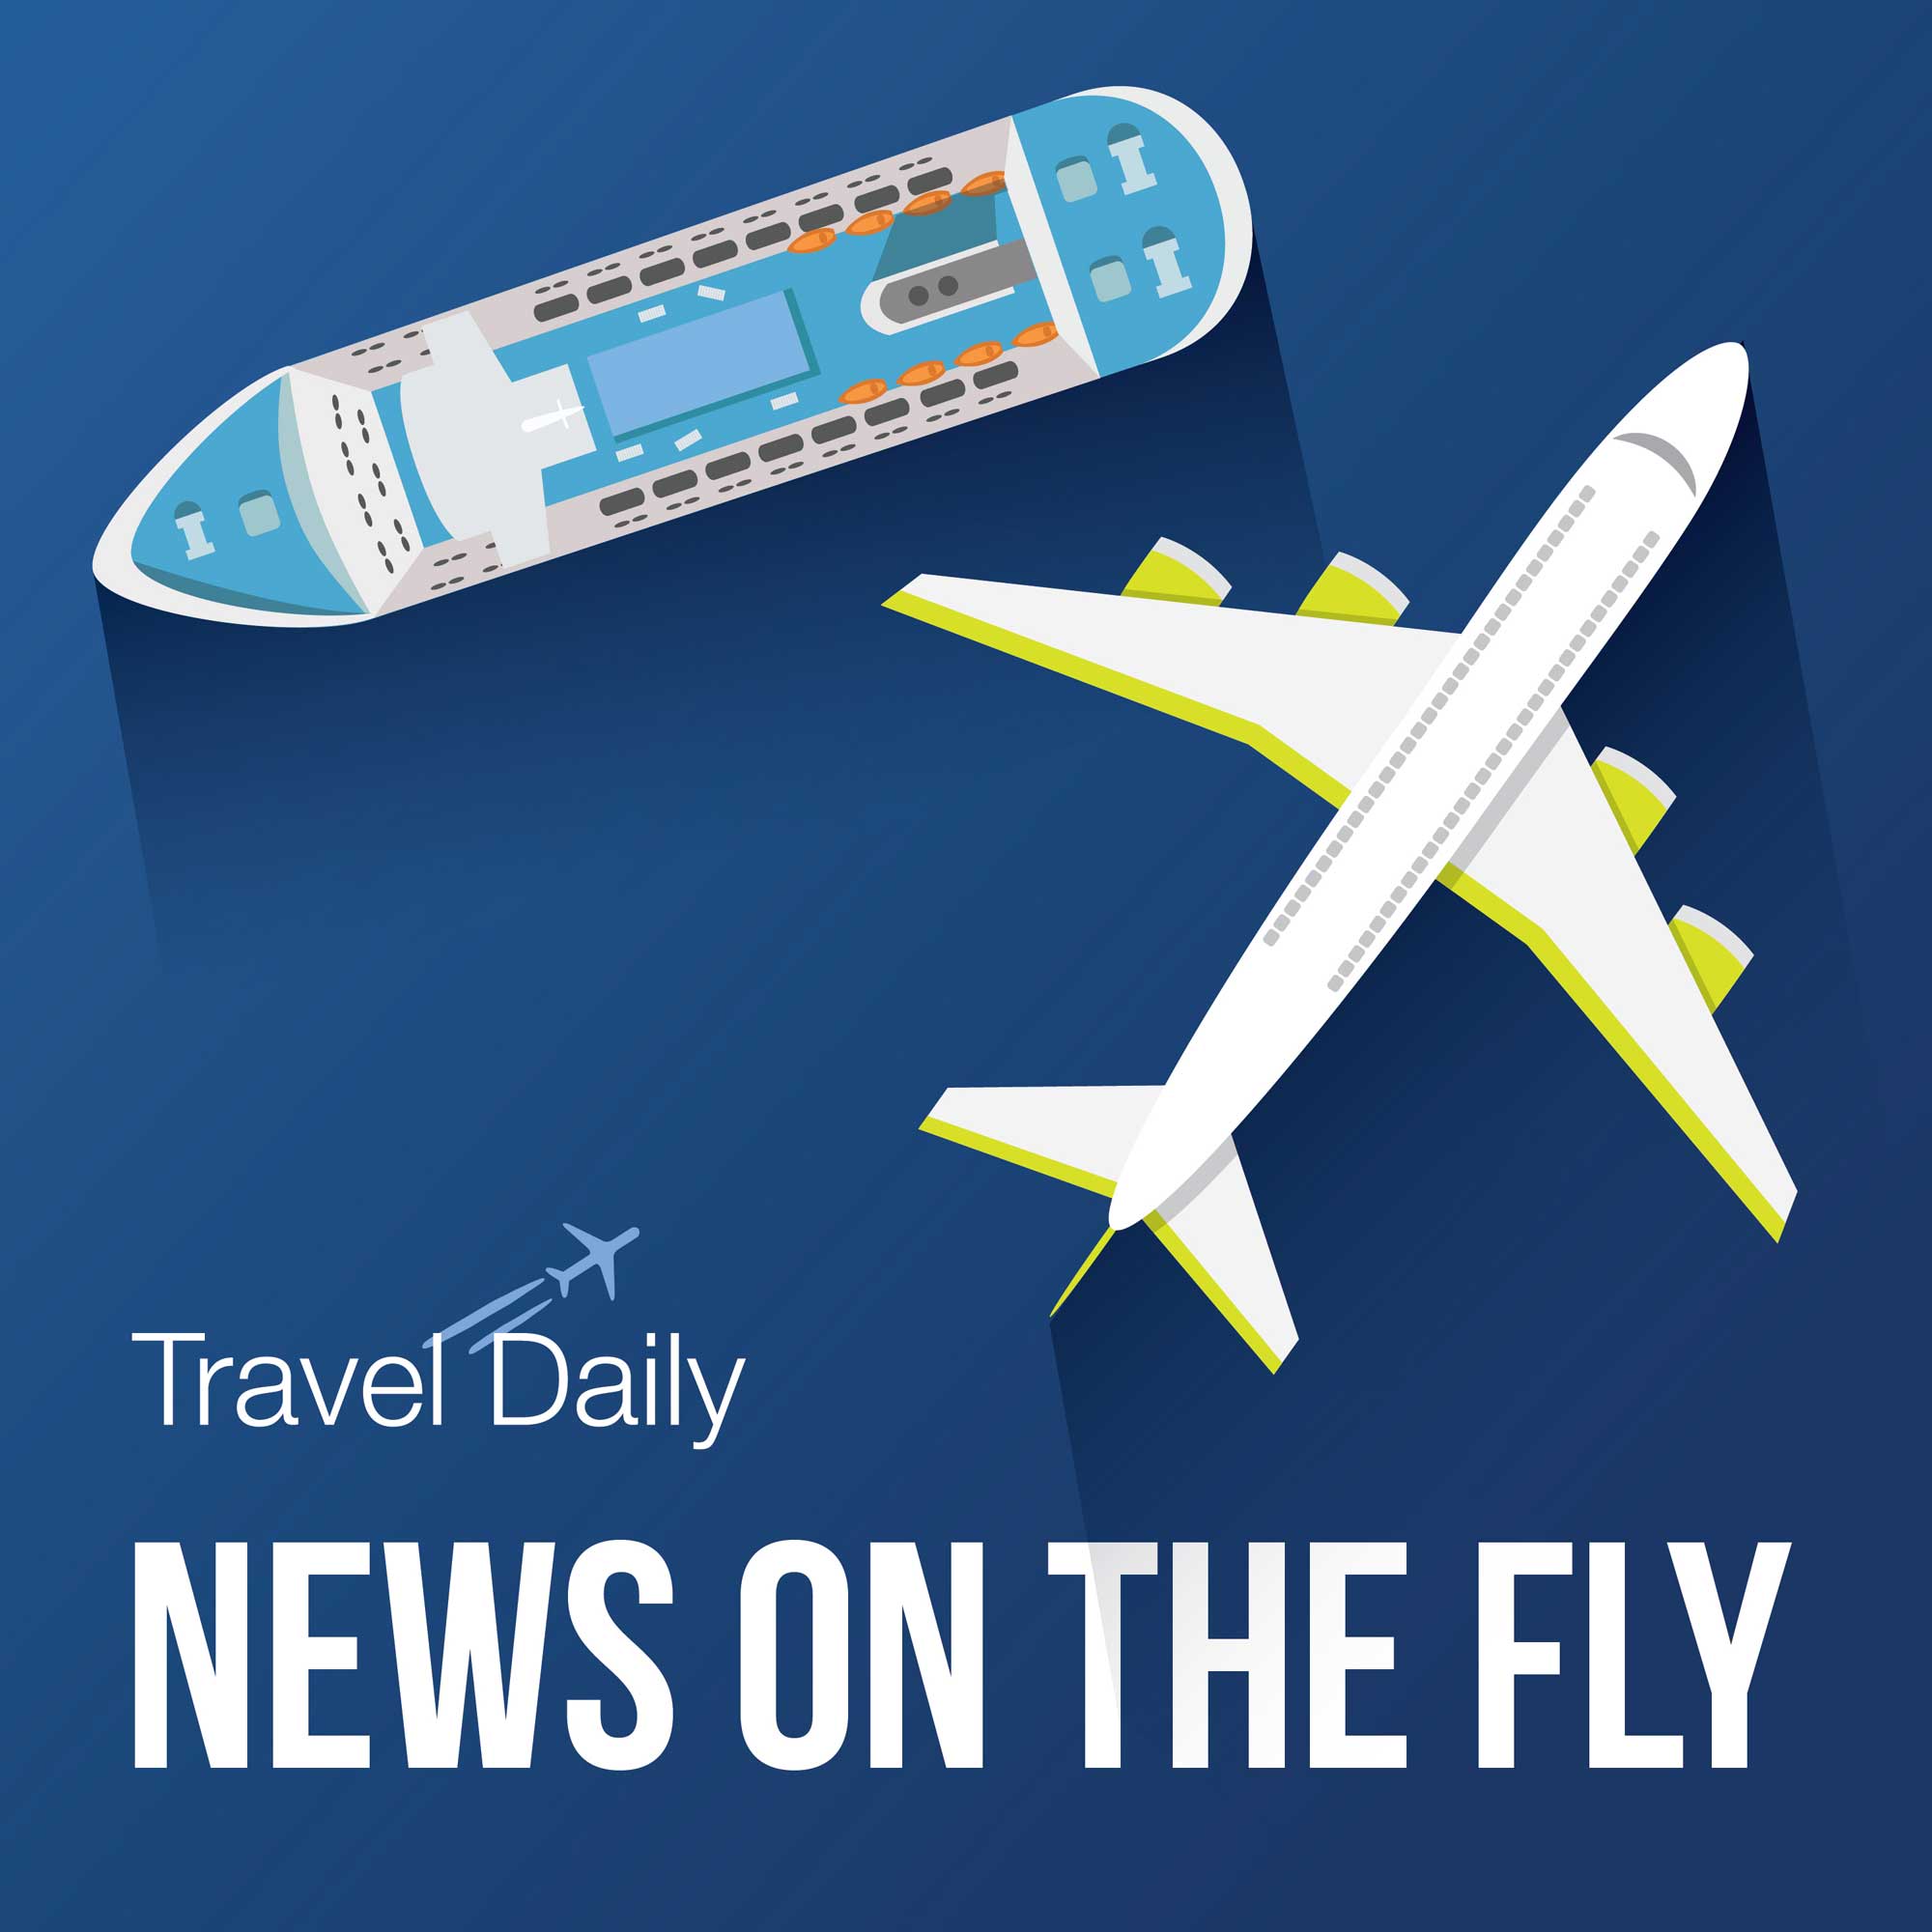 Travel Daily - News on the Fly